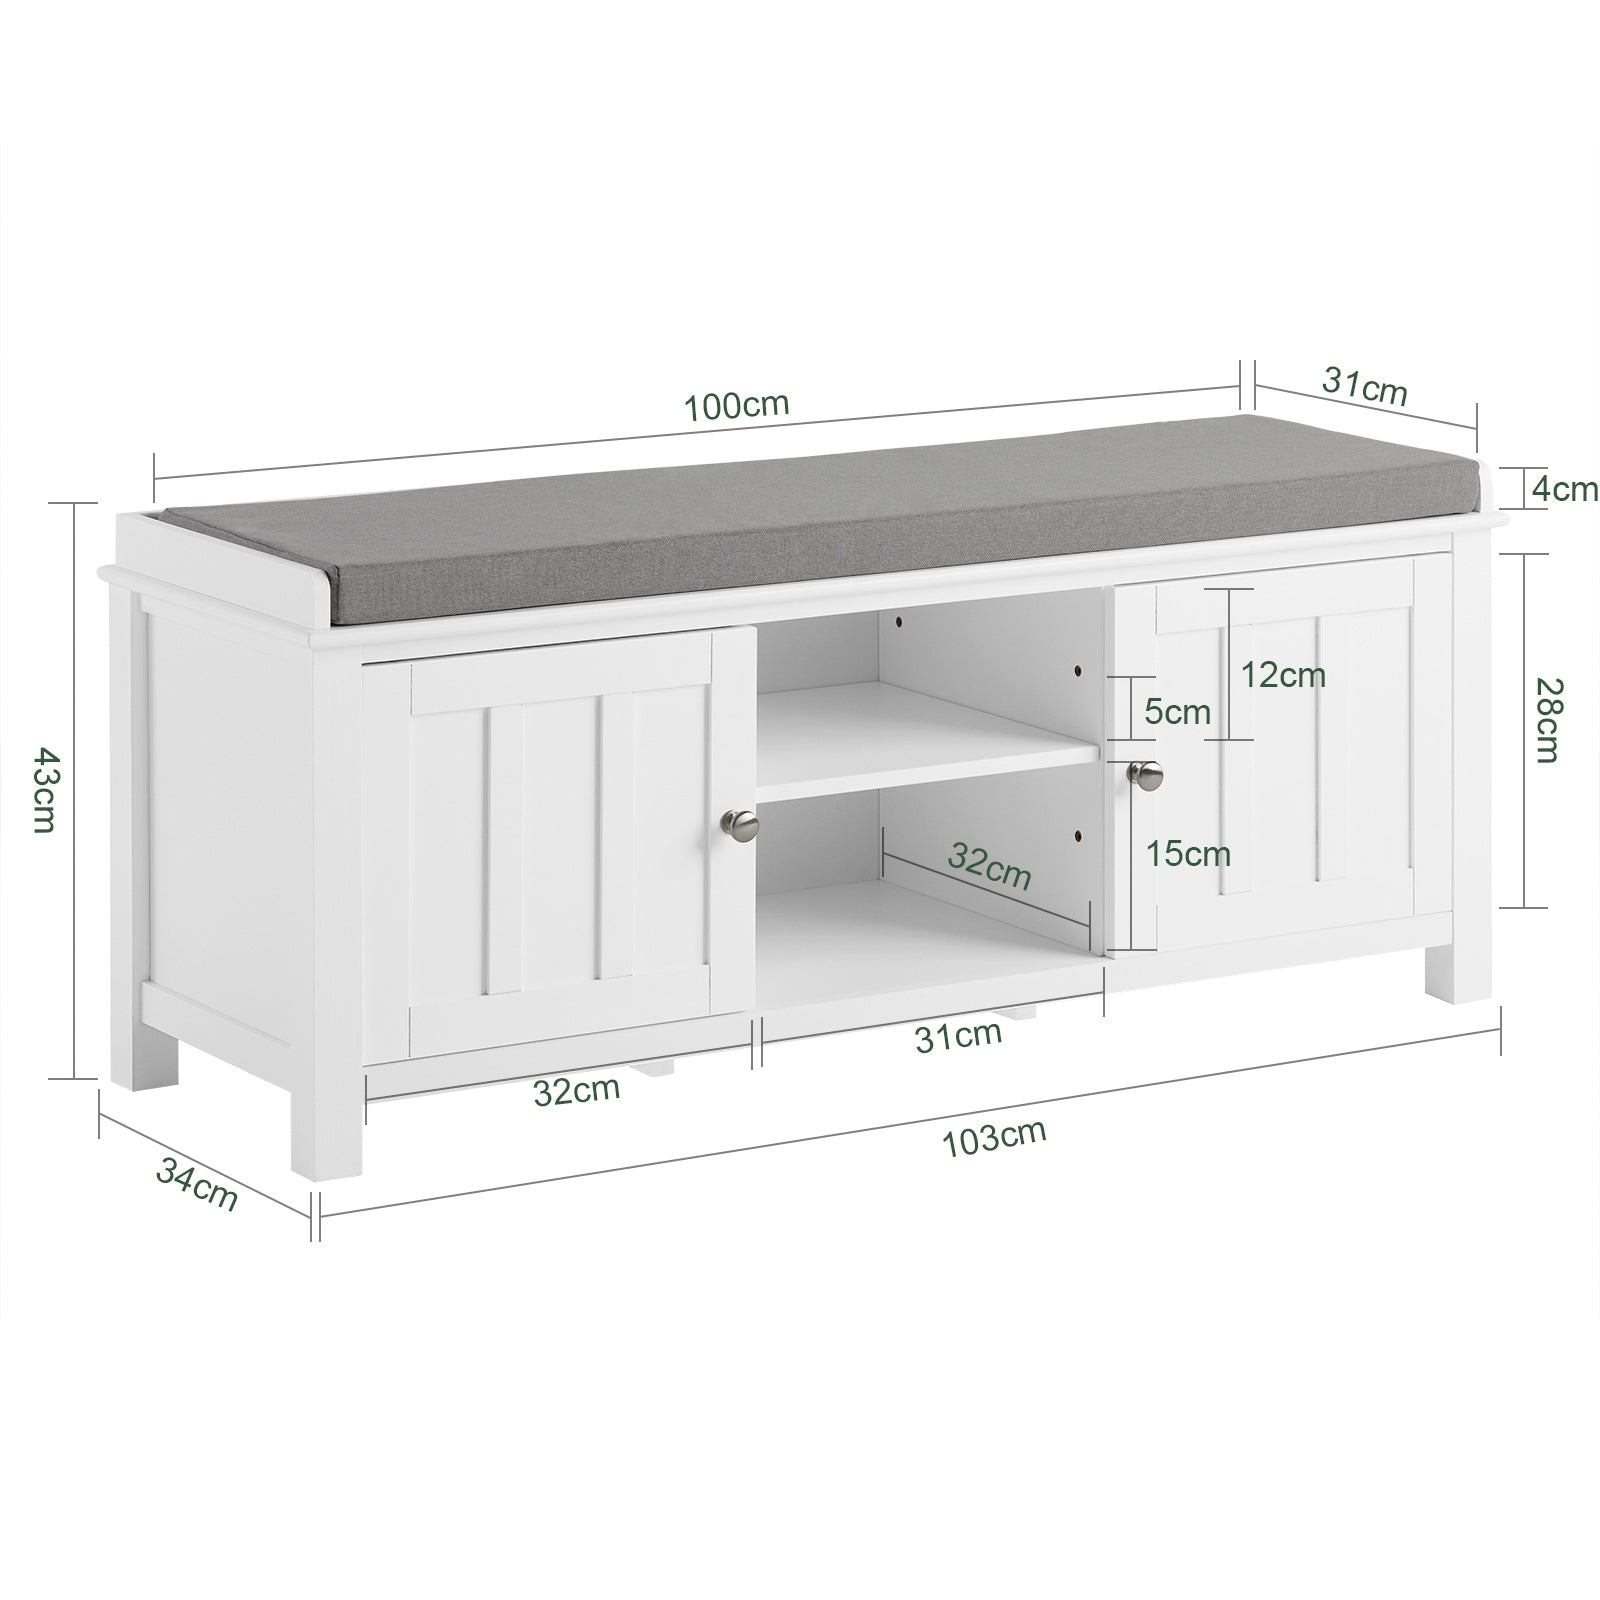 SoBuy FSR35-W White Storage Bench with 2 Doors & Removable Seat Cushion, Shoe Cabinet Shoe Bench